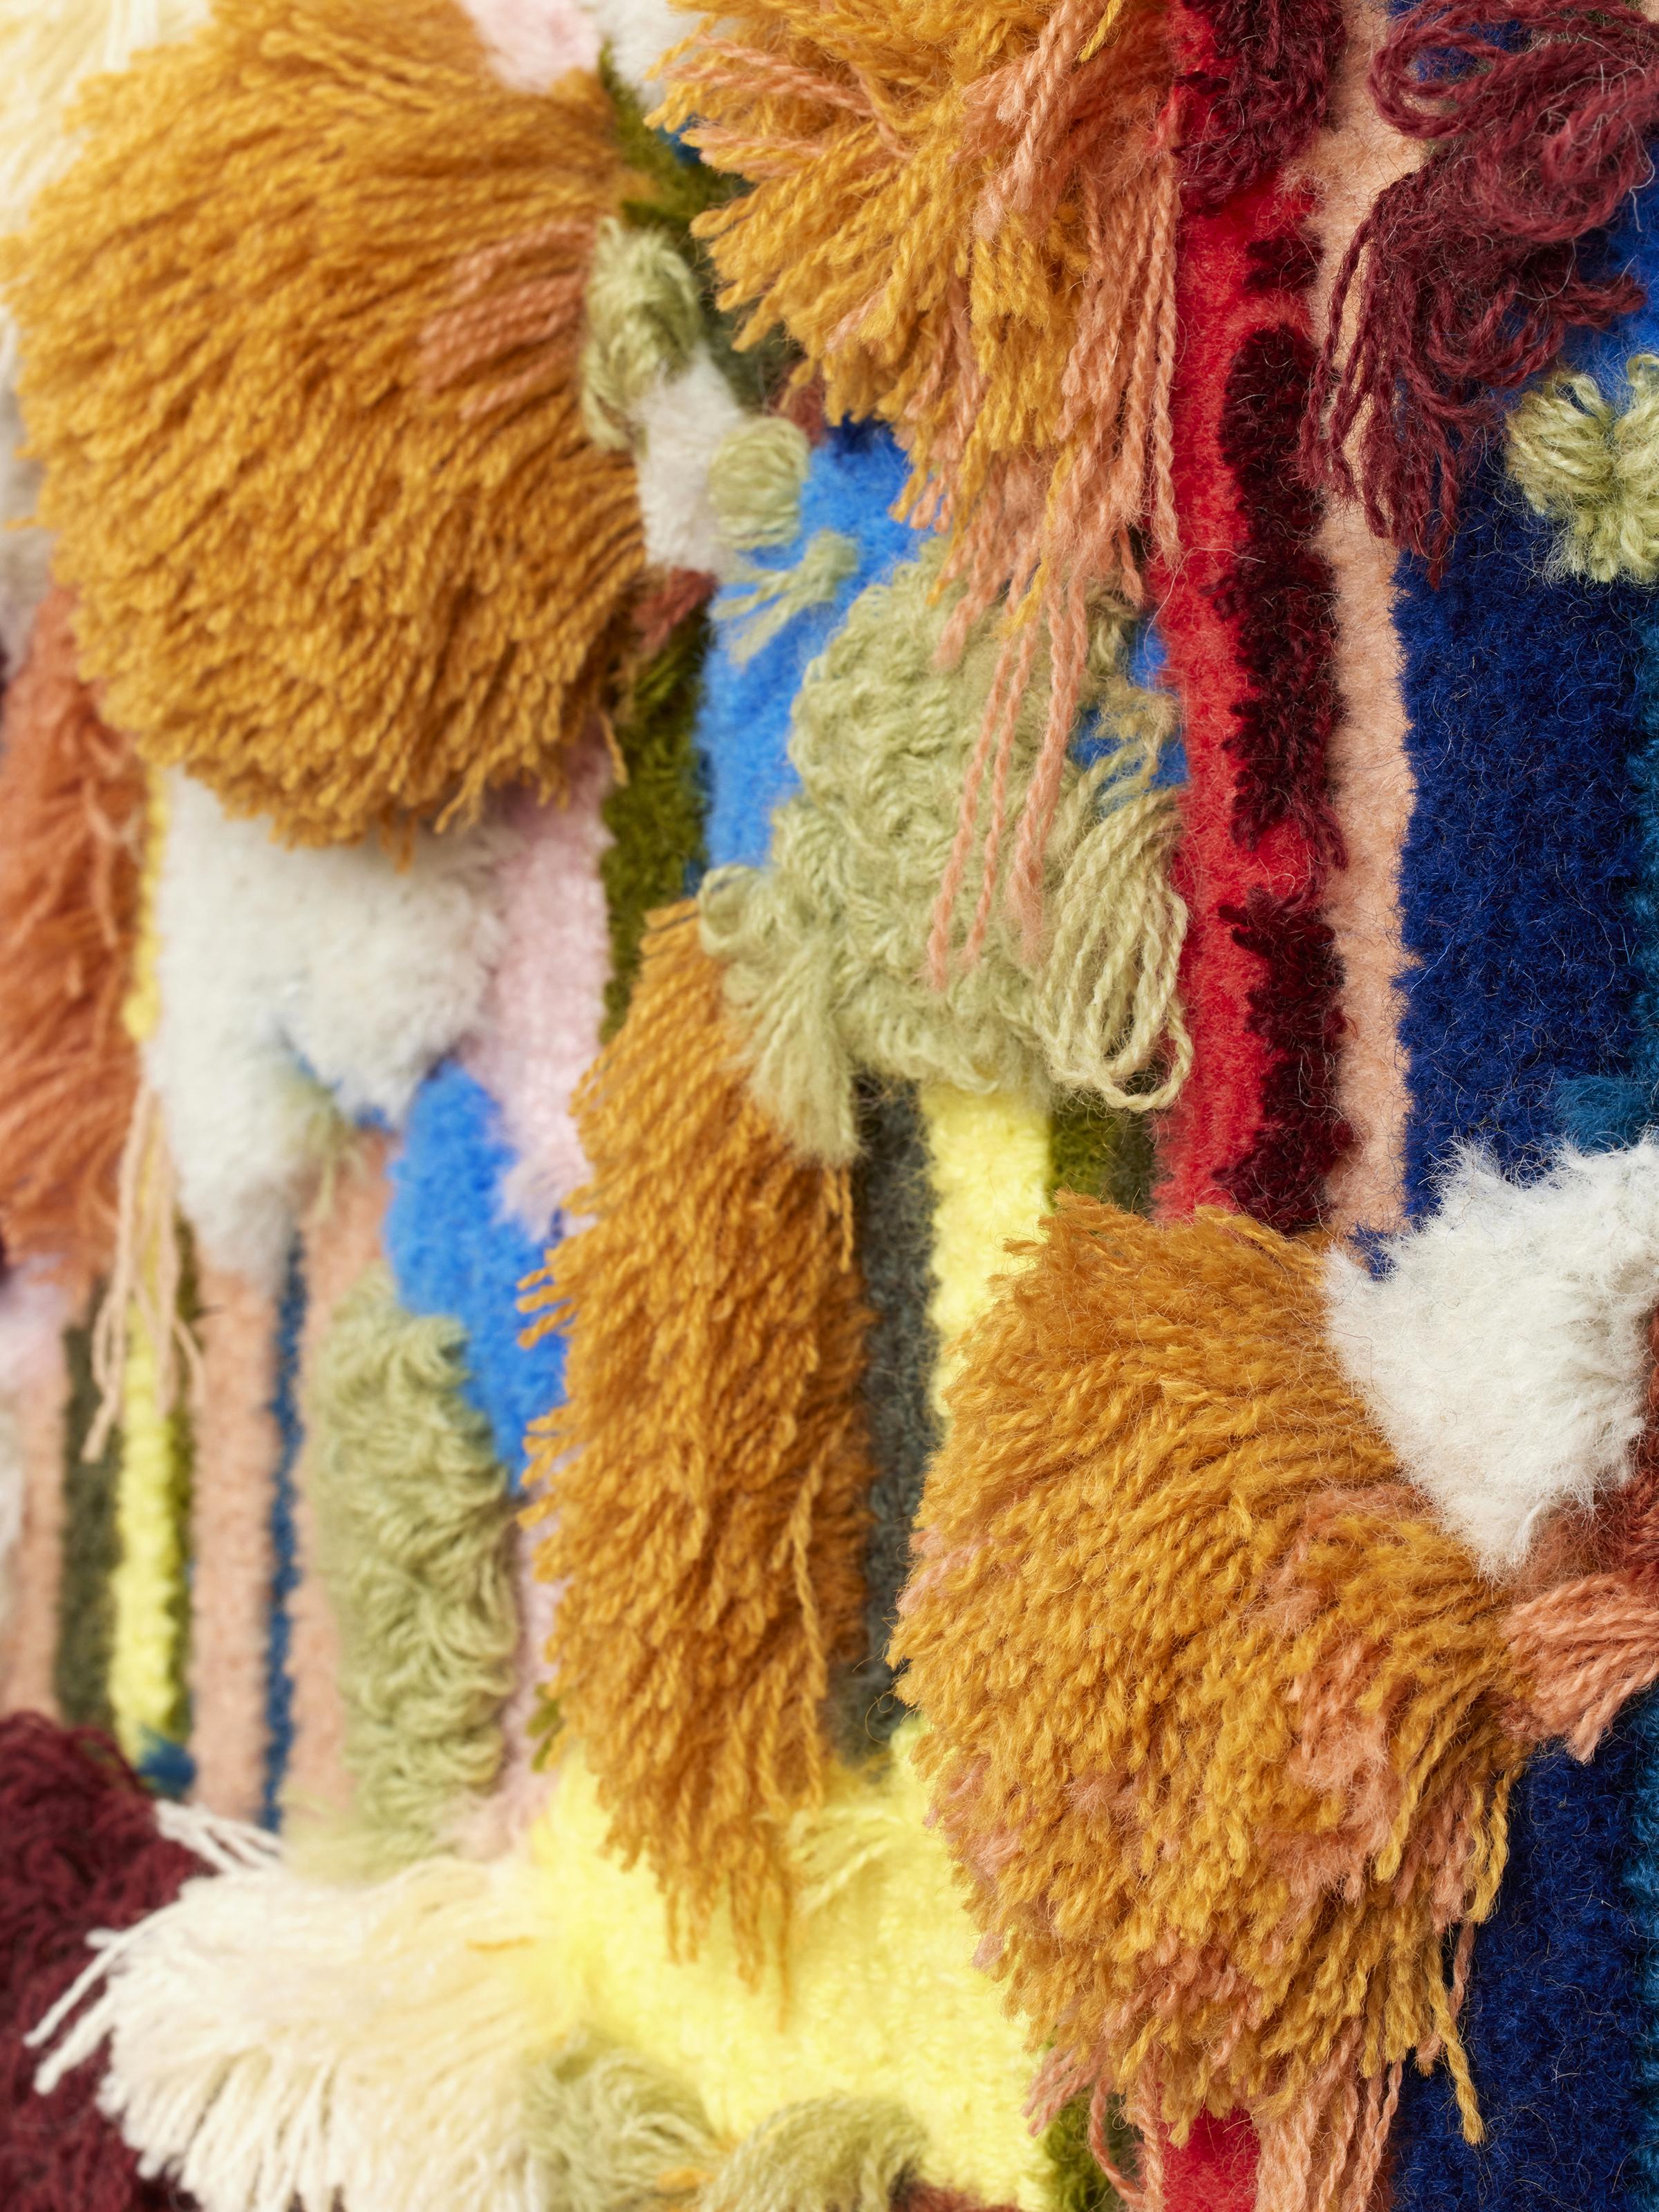 'A Tisket, A Tasket' - contemporary fiber art, textural, colorful, tufting - Abstract Sculpture by Trish Andersen